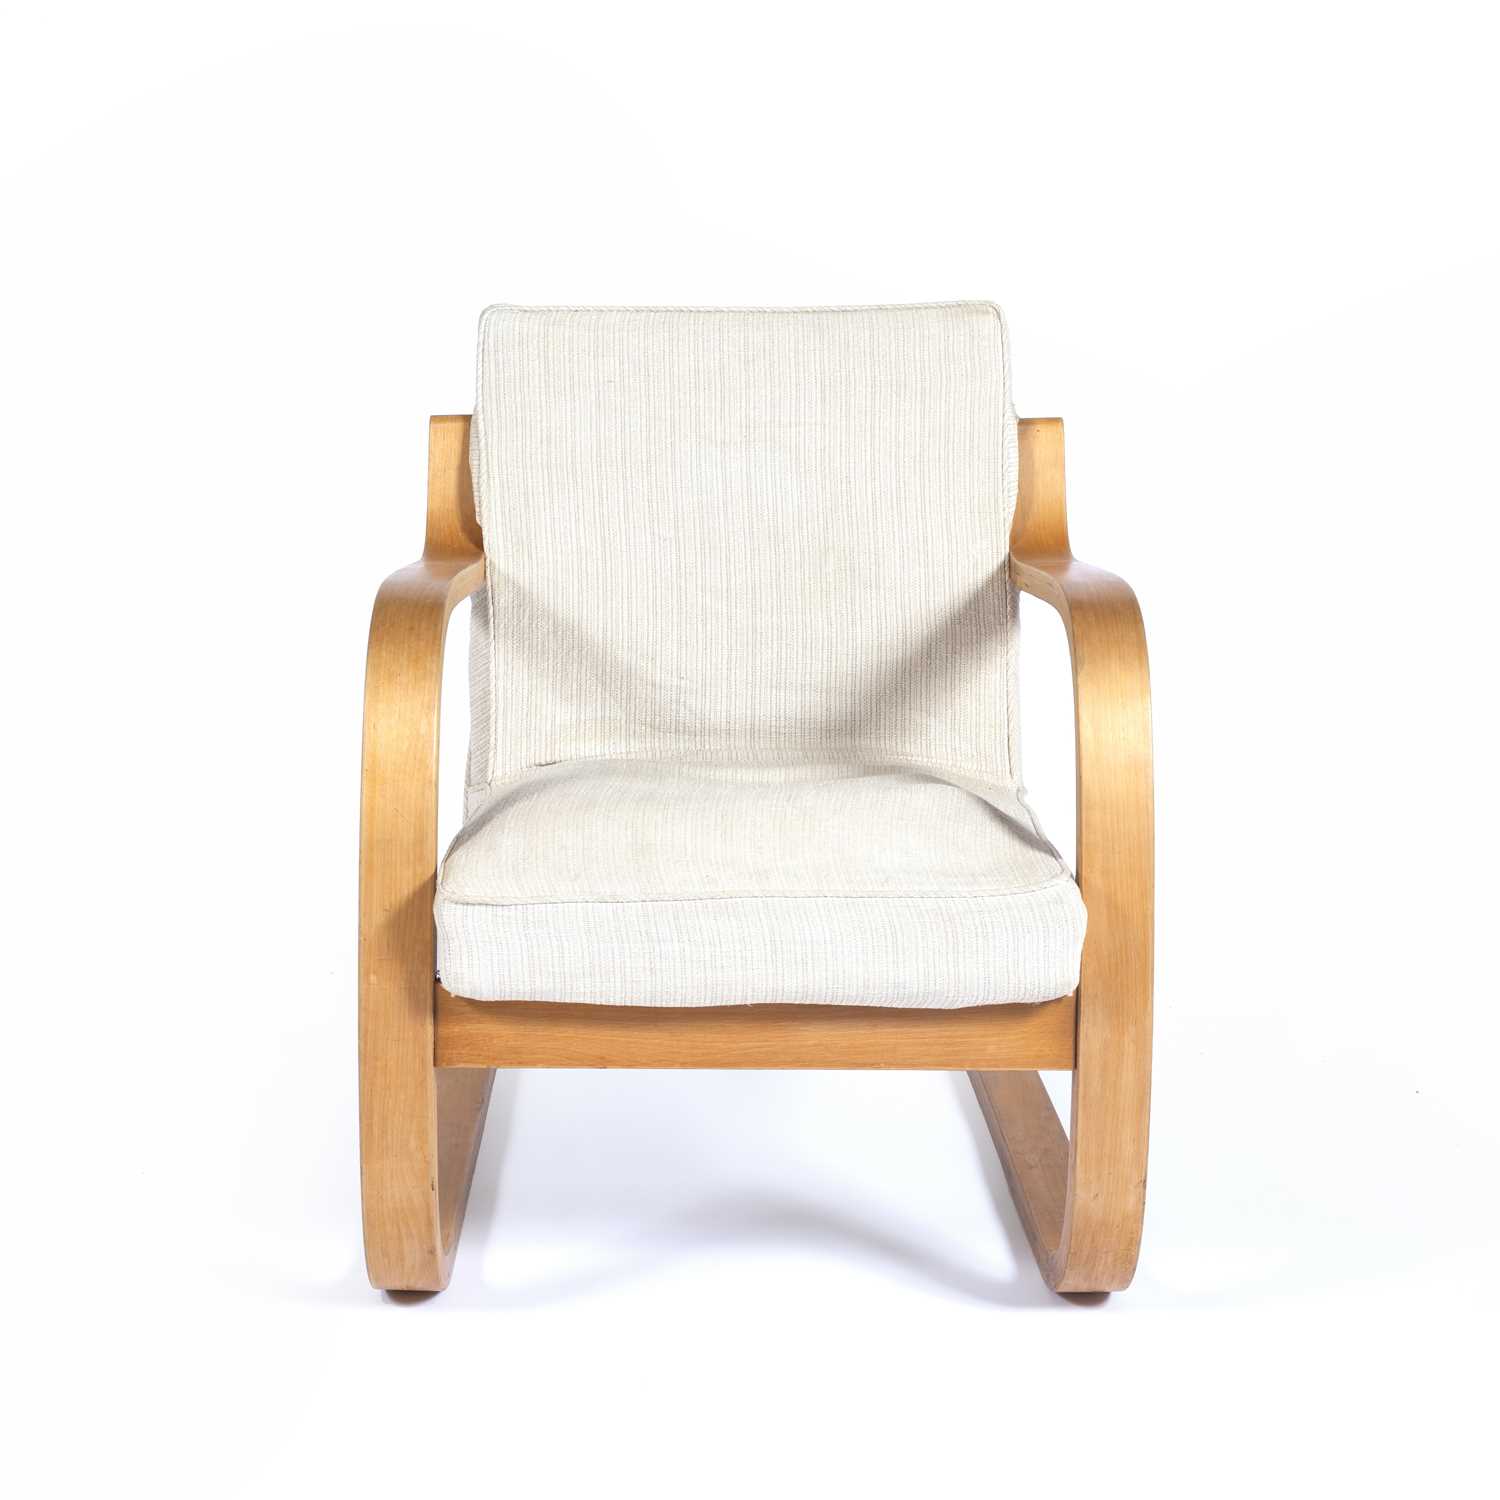 Alvar Aalto (1898-1976) for Finmar Ltd 'Model 402' bentwood birch chair, with the original label - Image 2 of 8